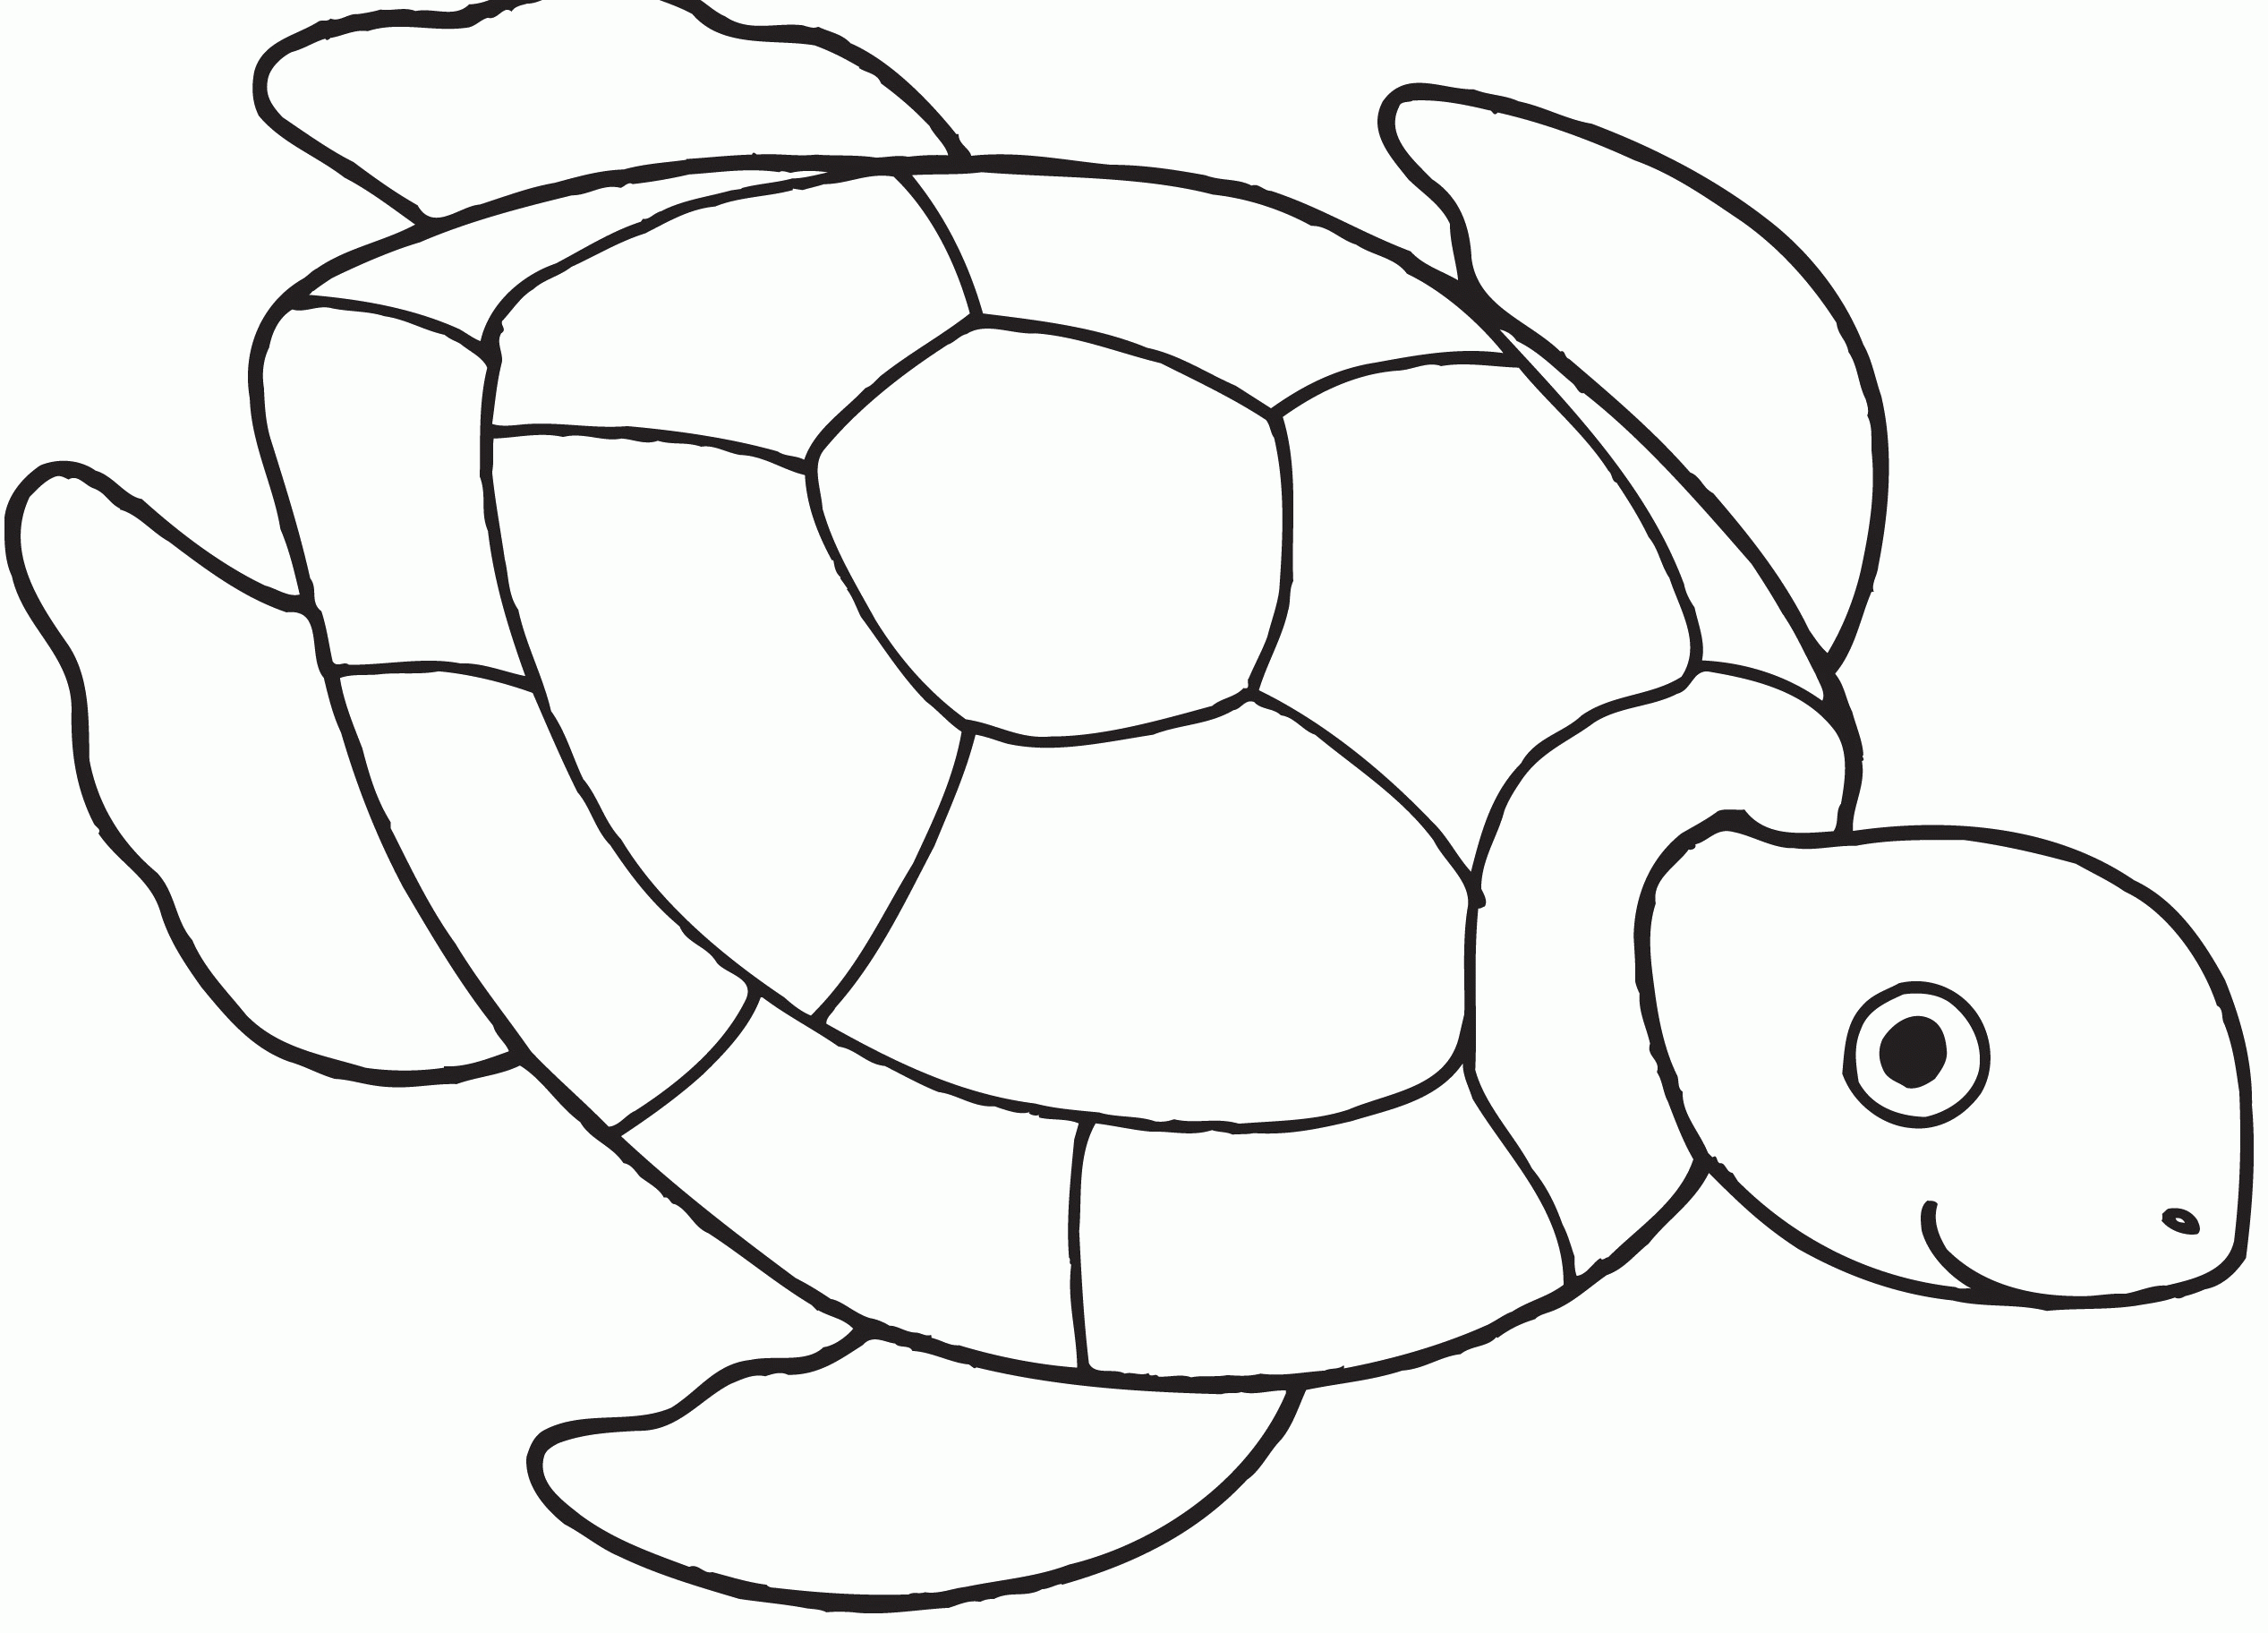 Turtle Coloring Page Coloring Book Coloring Pages 22910 ...